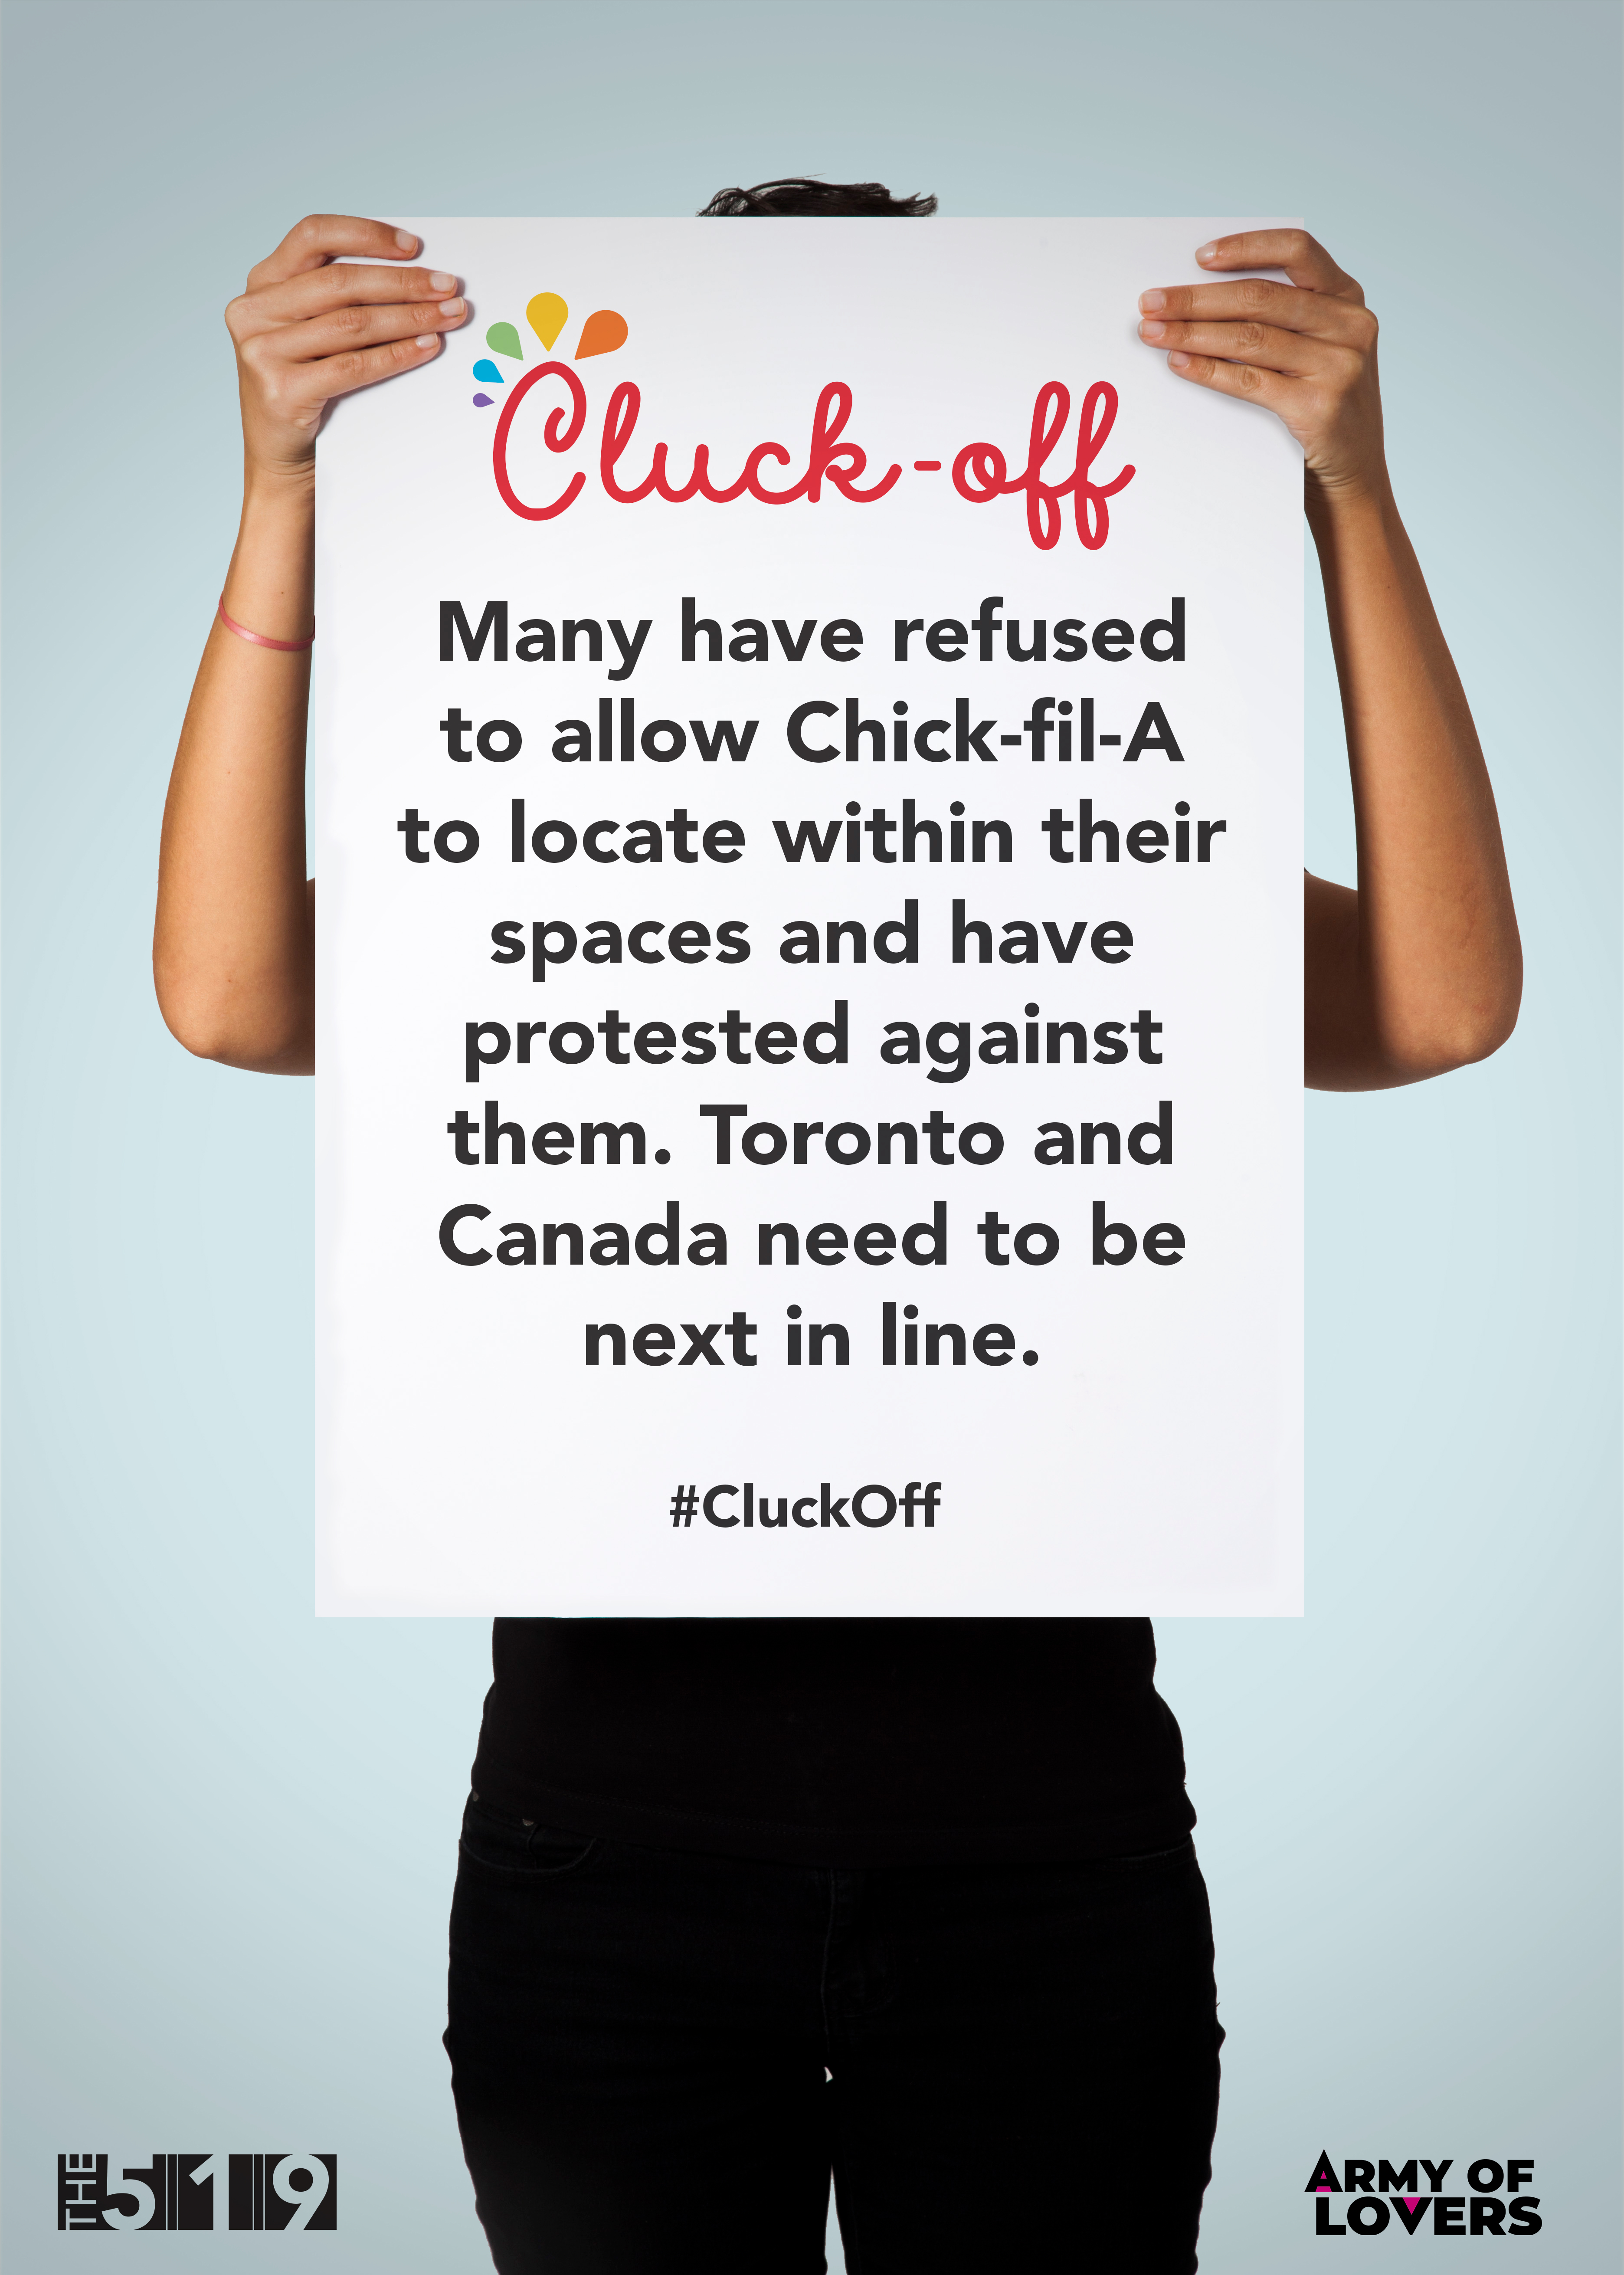 Individual holding a white posters that reads "Cluck-off" in red similar to Chick-fil-A's branding. It has text "Many have refused to allow Chick-fil-A to locate within their spaces and have protested against them. Toronto and Canada need to be next in line." #CluckOff